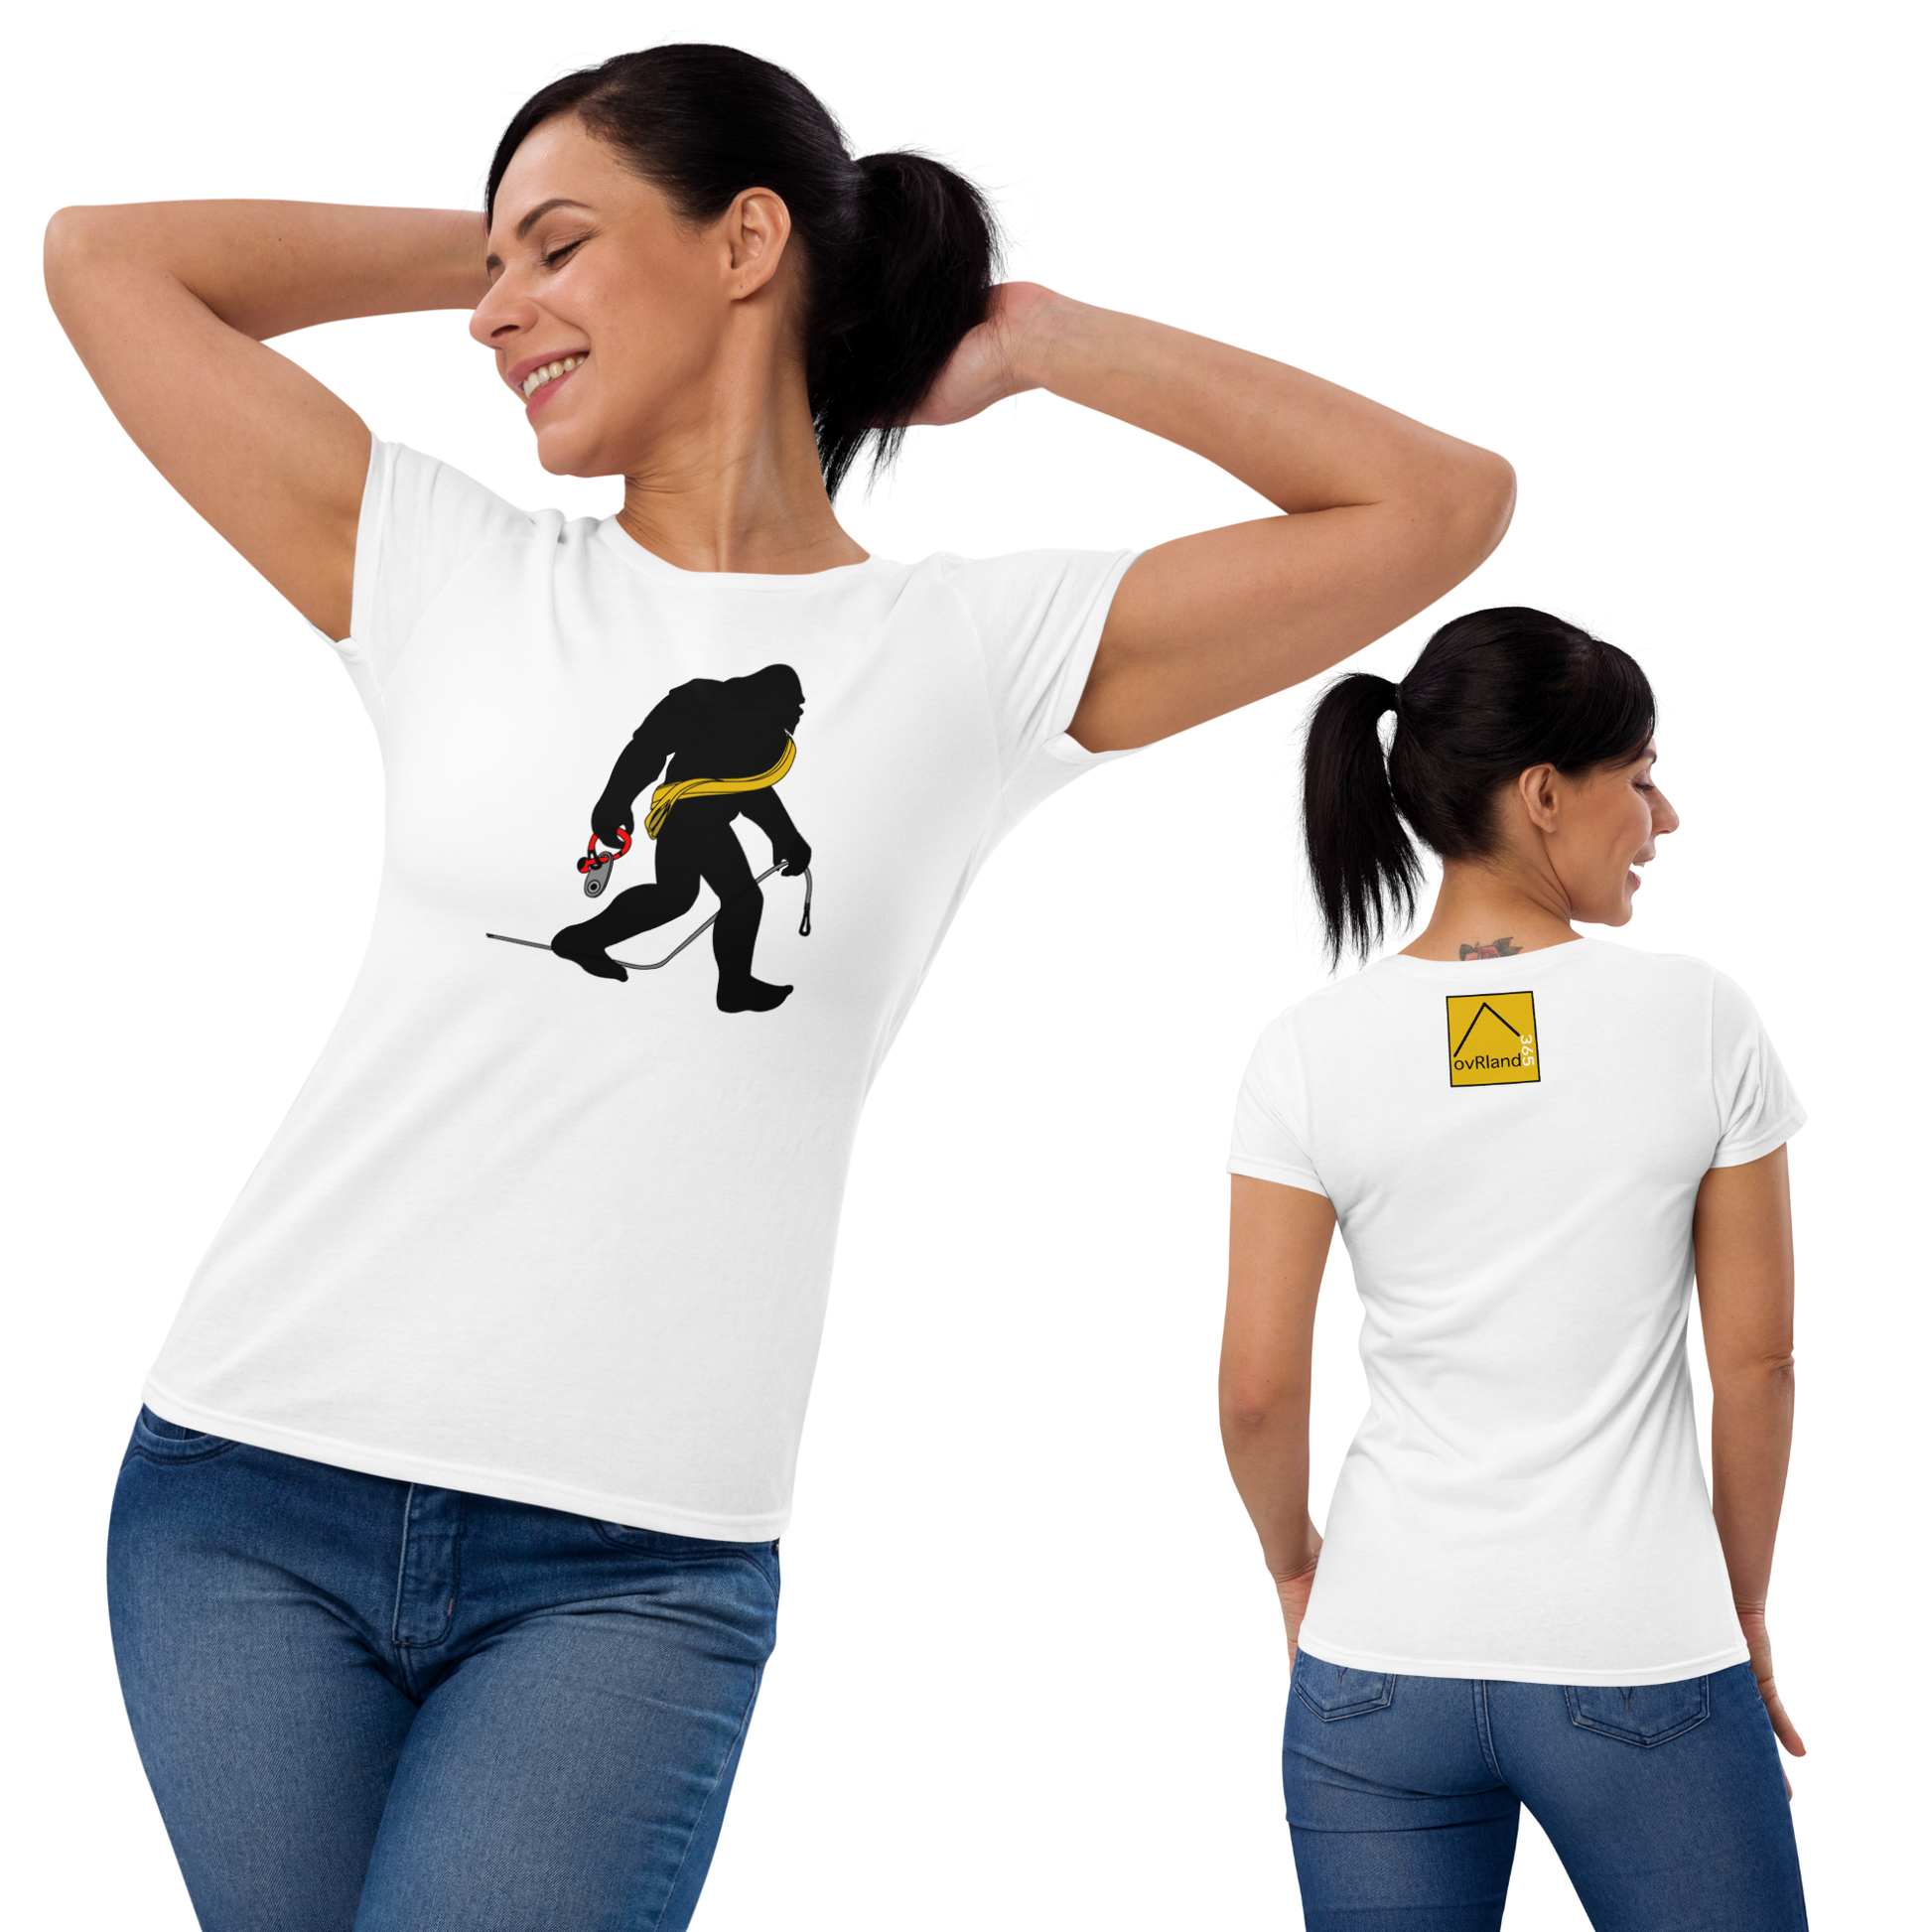 BigFoot Recovery Overland Offload Women's Tee. White. overland365.com 